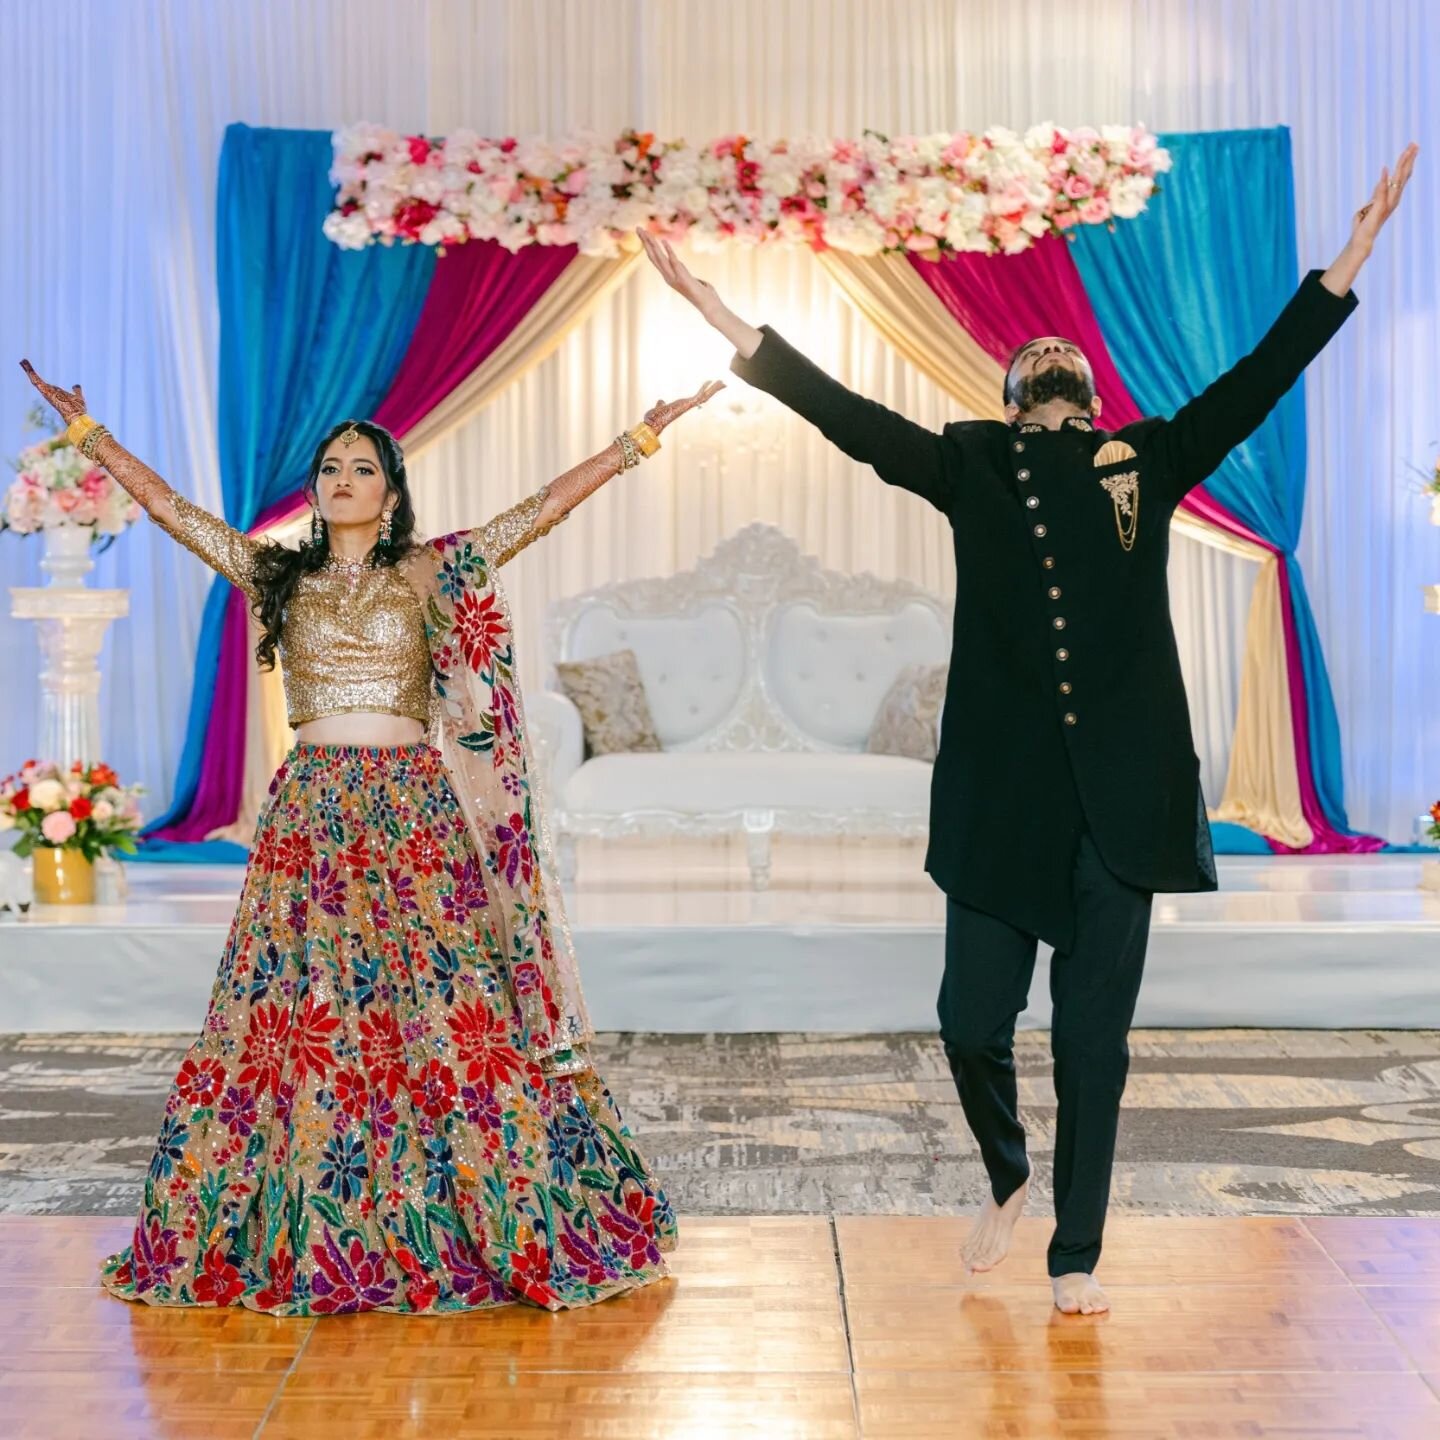 This B&amp;G totally rocked the dance floor! Their epic performance had everyone in awe.⁠
⁠
⁠
#bostonwedding #bostonweddings #bostonweddingphotographer ⁠
#indianwedding #desiwedding #indianweddingphotographer #IndianWeddings #indianweddinginspiration